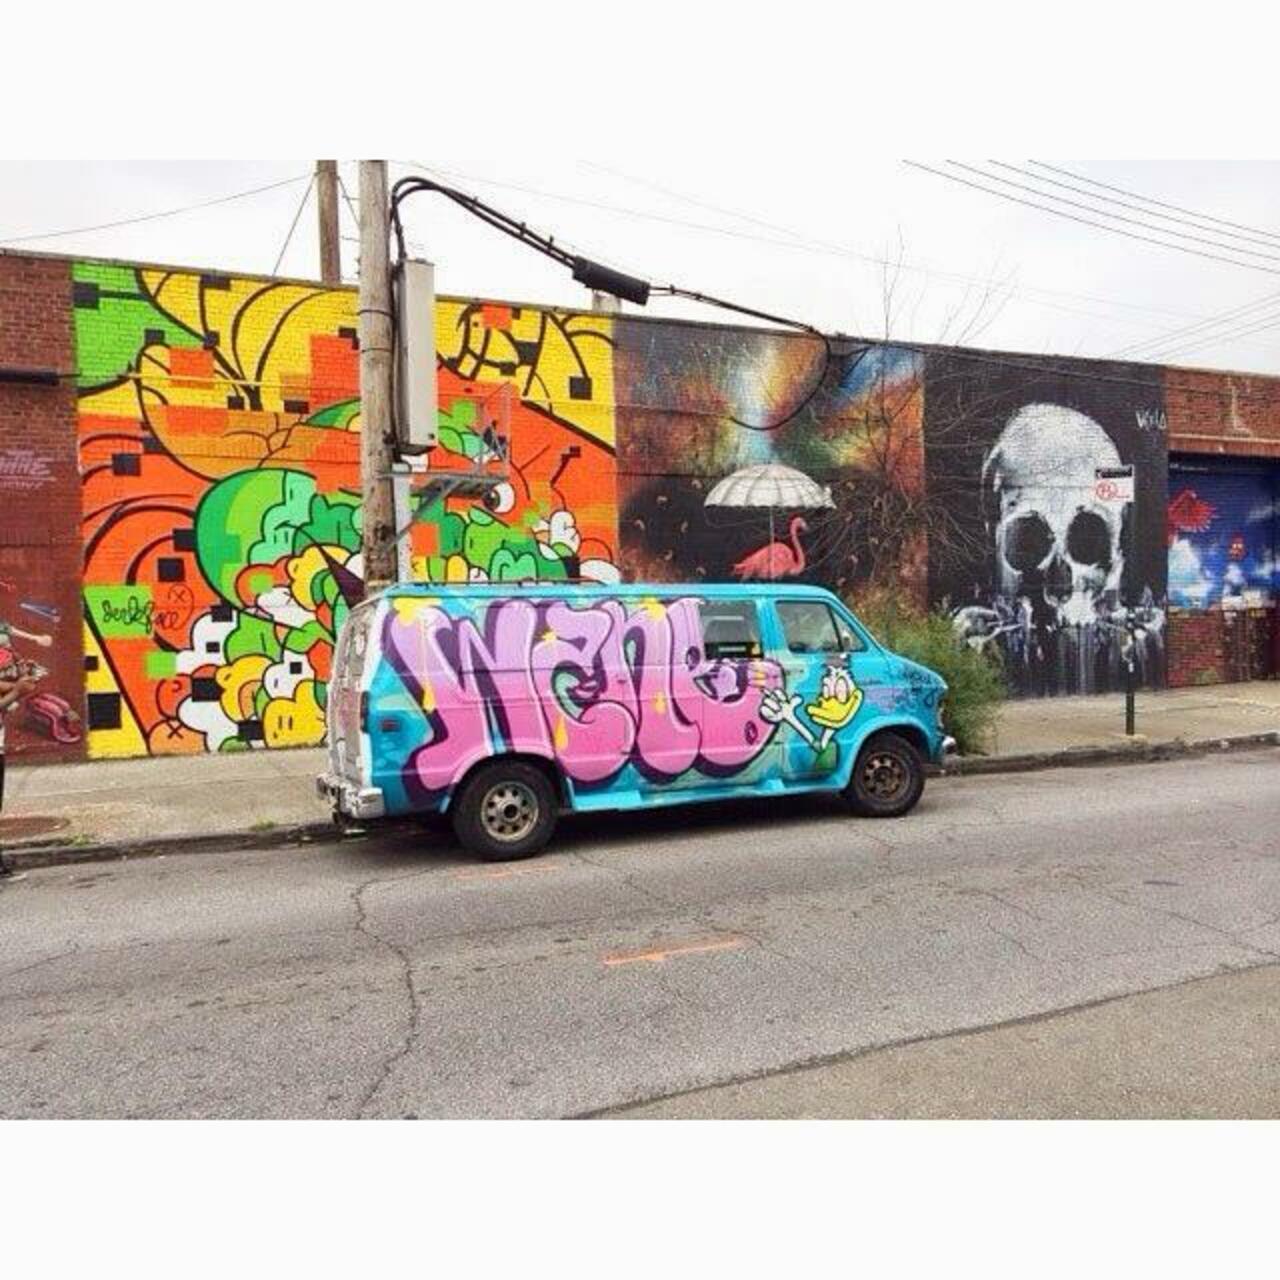 I saw this van in #brooklyn . Does anyone know of the #artist ? #streetart #graffiti http://t.co/Qcnm0e3Gvz